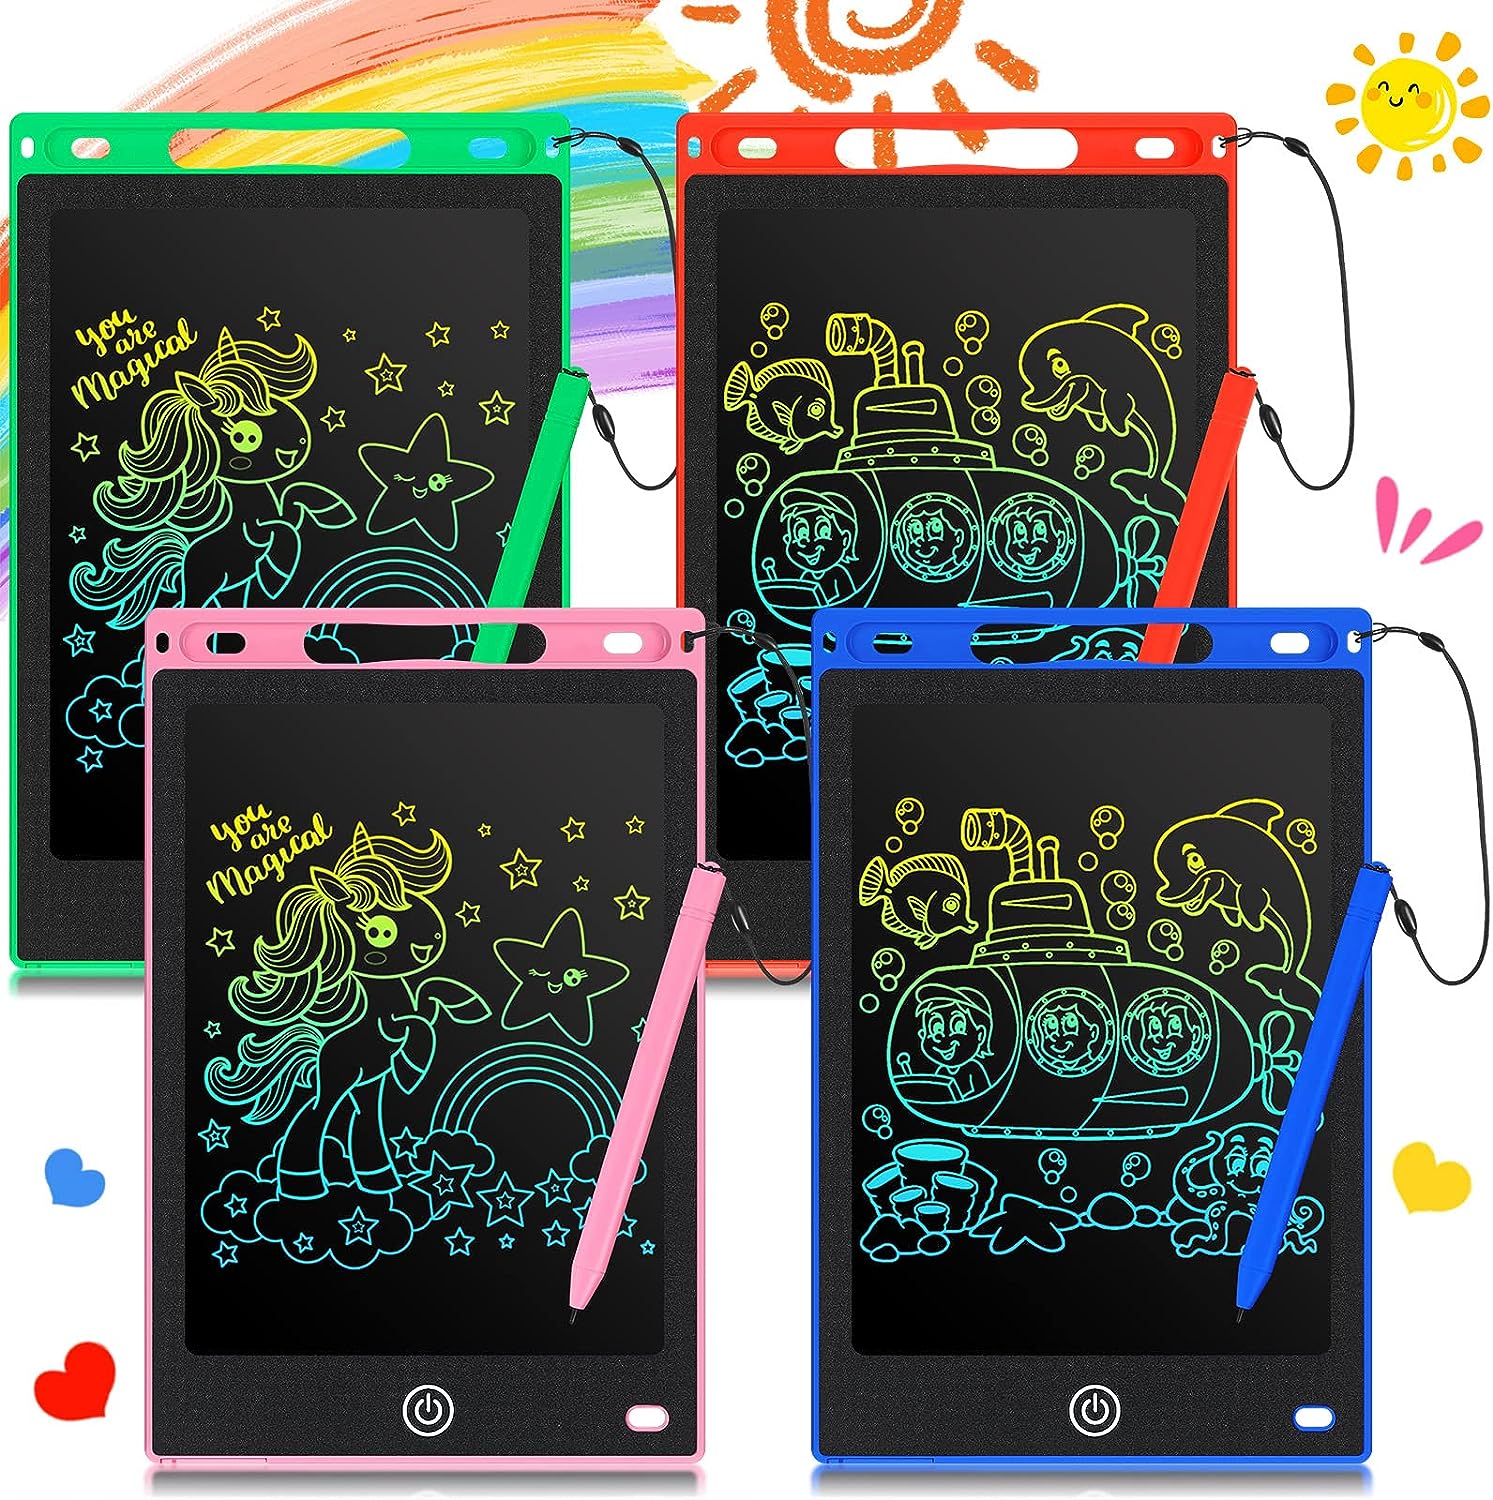 4 Pcs LCD Writing Tablet Doodle Board Electronic Toy [...]